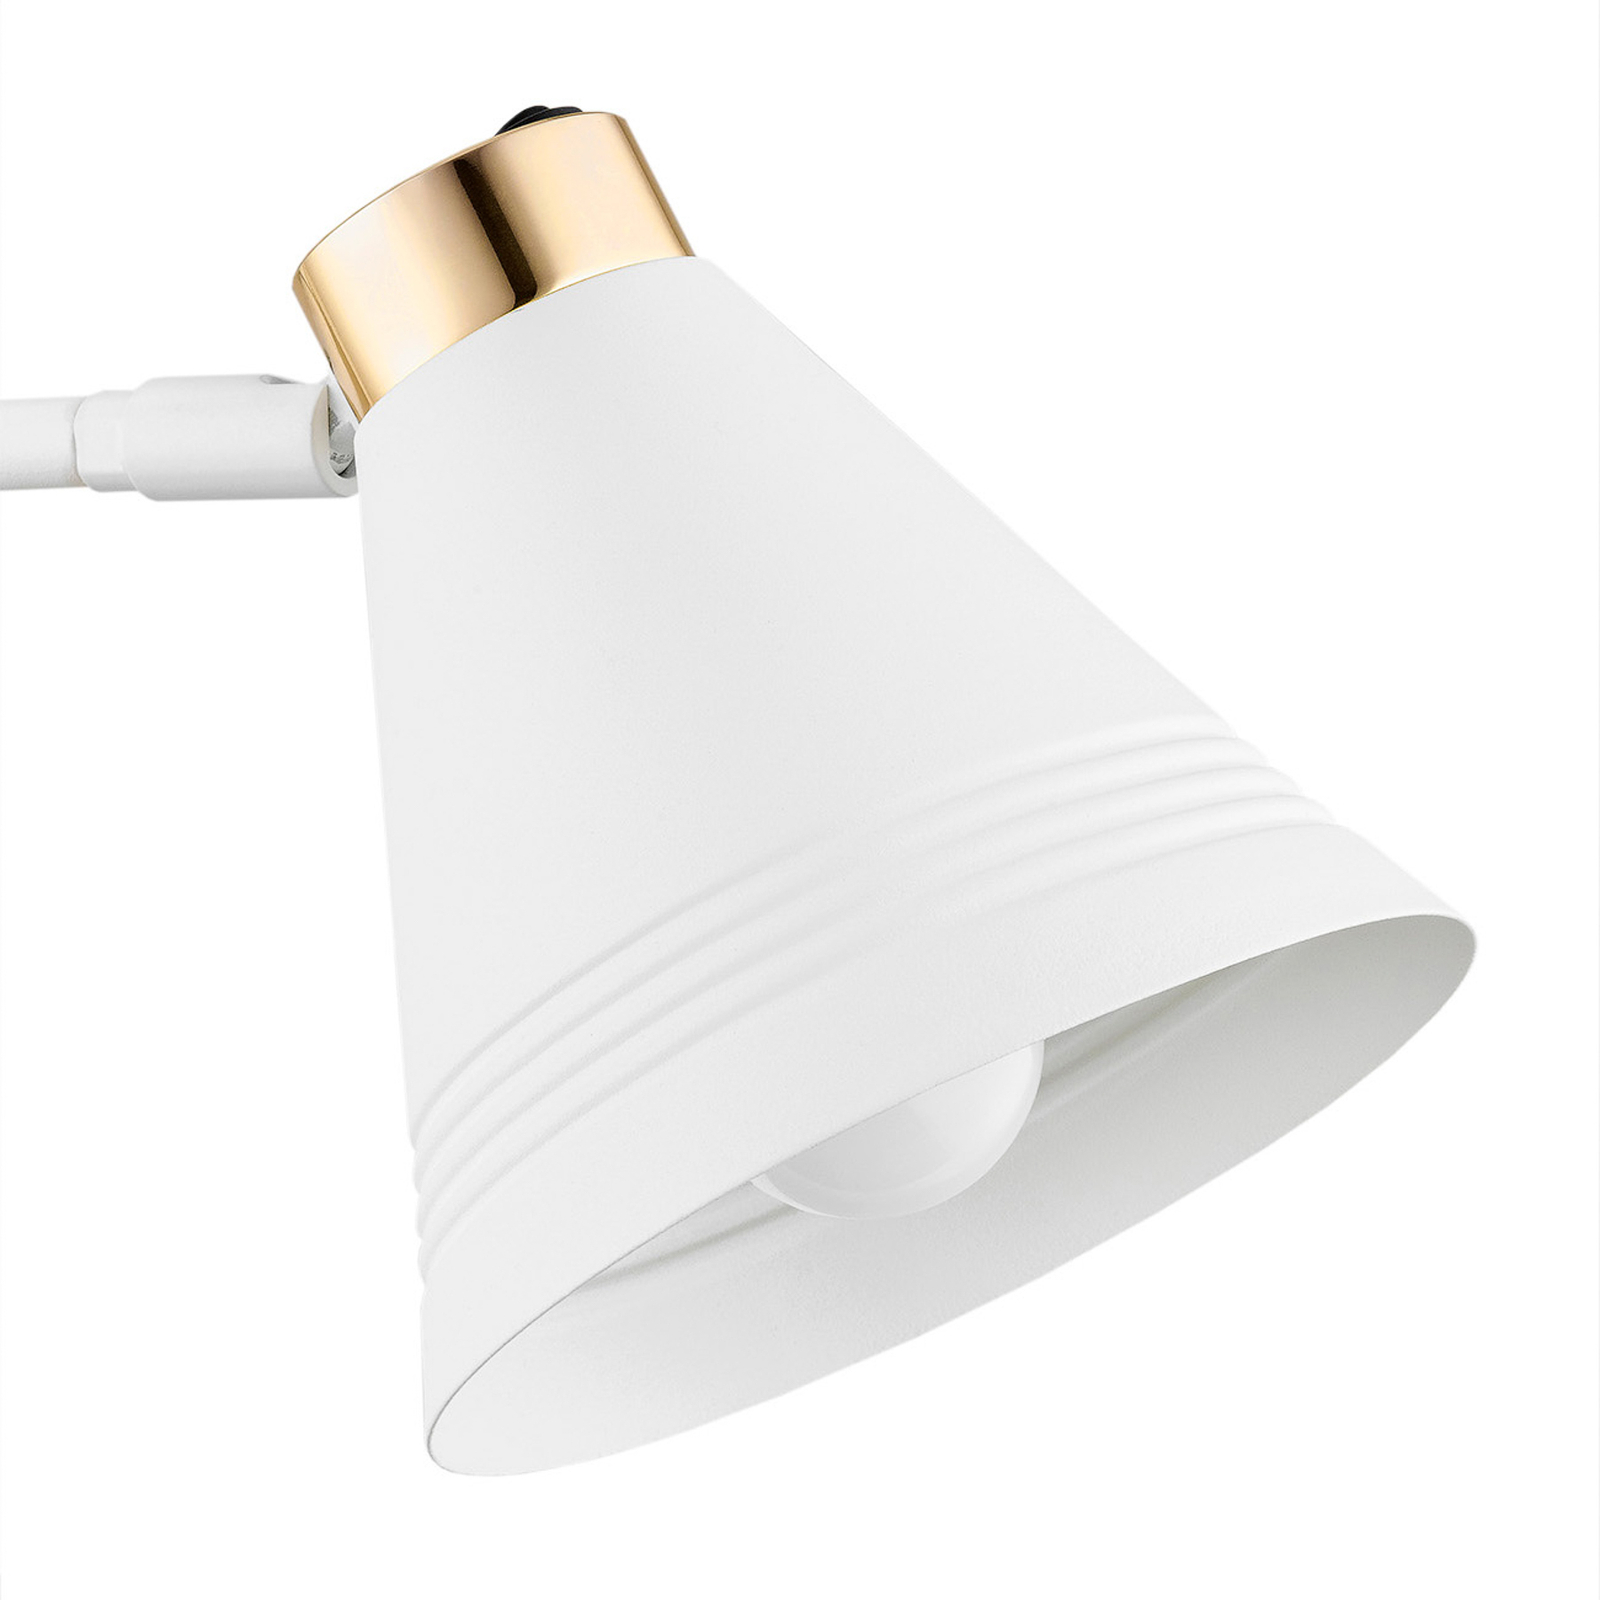 Avalone wall light, projection 34cm, white/brass